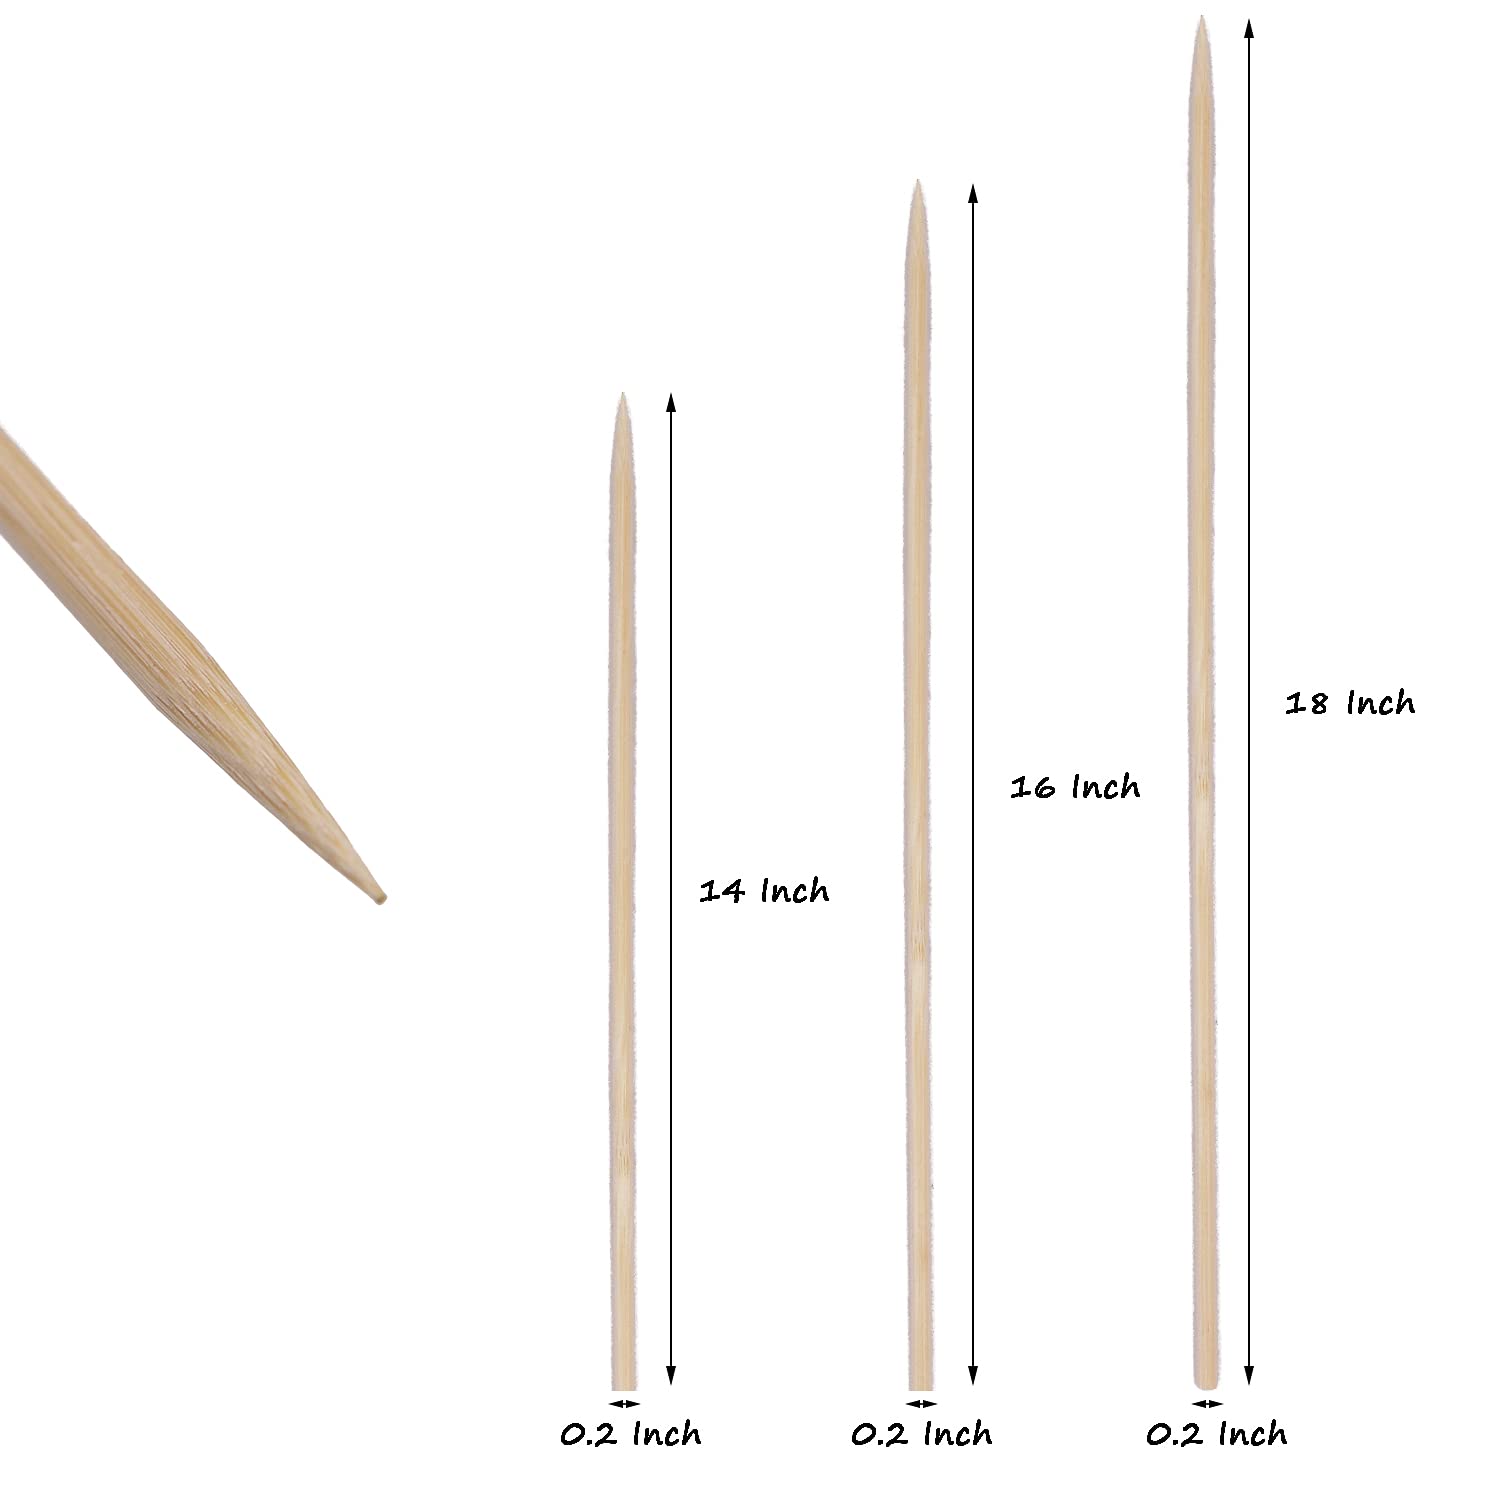 Bamboo Plant Stakes,HAINANSTRY Wood Plant Supports,Natural Bamboo Sticks for Plants/Floral/Potted Plant,Wooden Sign Posting Garden Sticks - 18 Inches 25 Pack